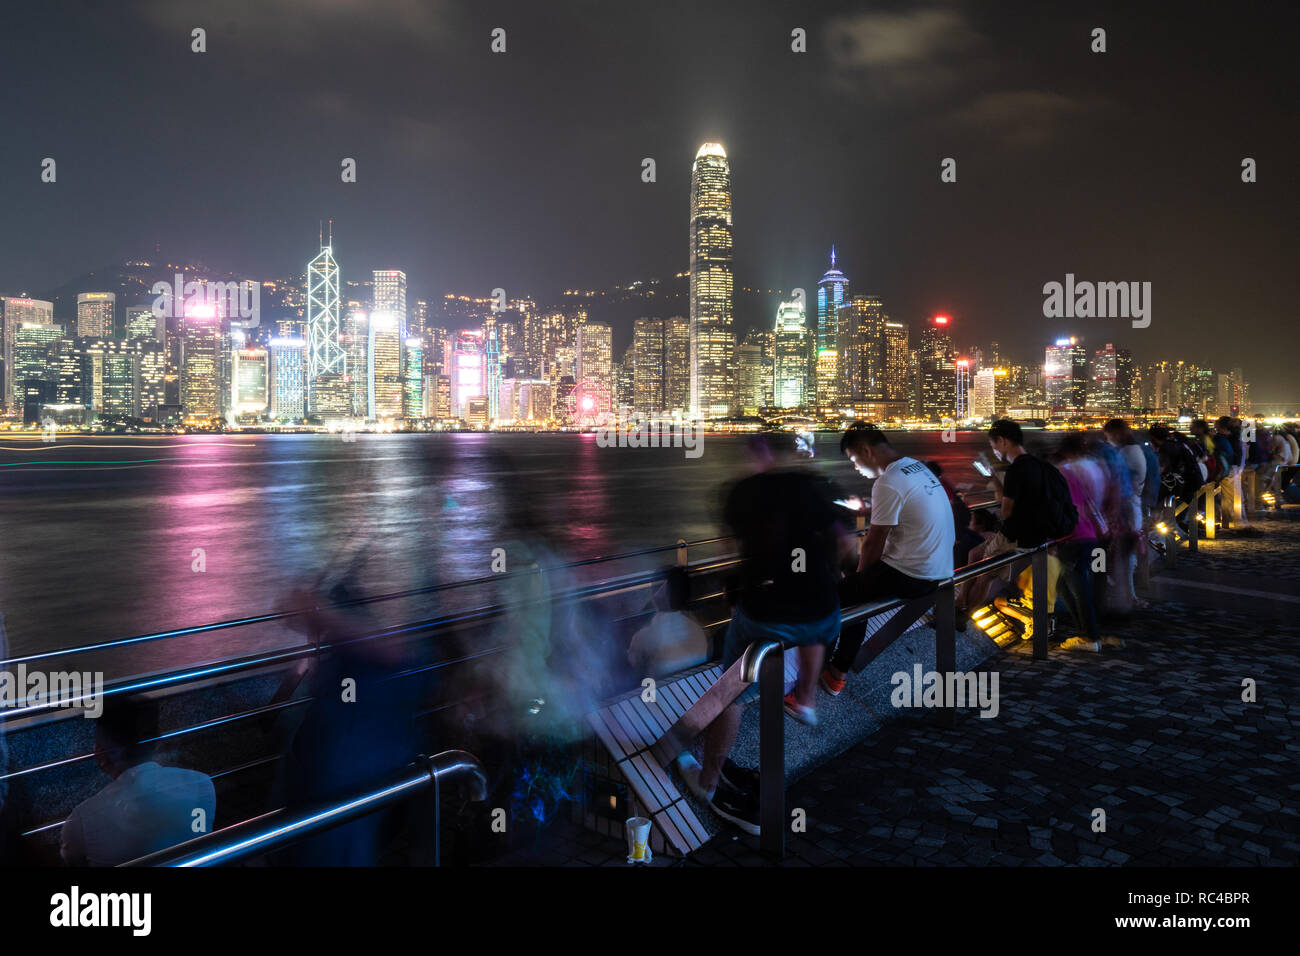 Hong Kong, China - October 15 2018: Tourists enjoying the Hong Kong Central business district skyline from the observation deck in Tsim Sha Tsui, Kowl Stock Photo